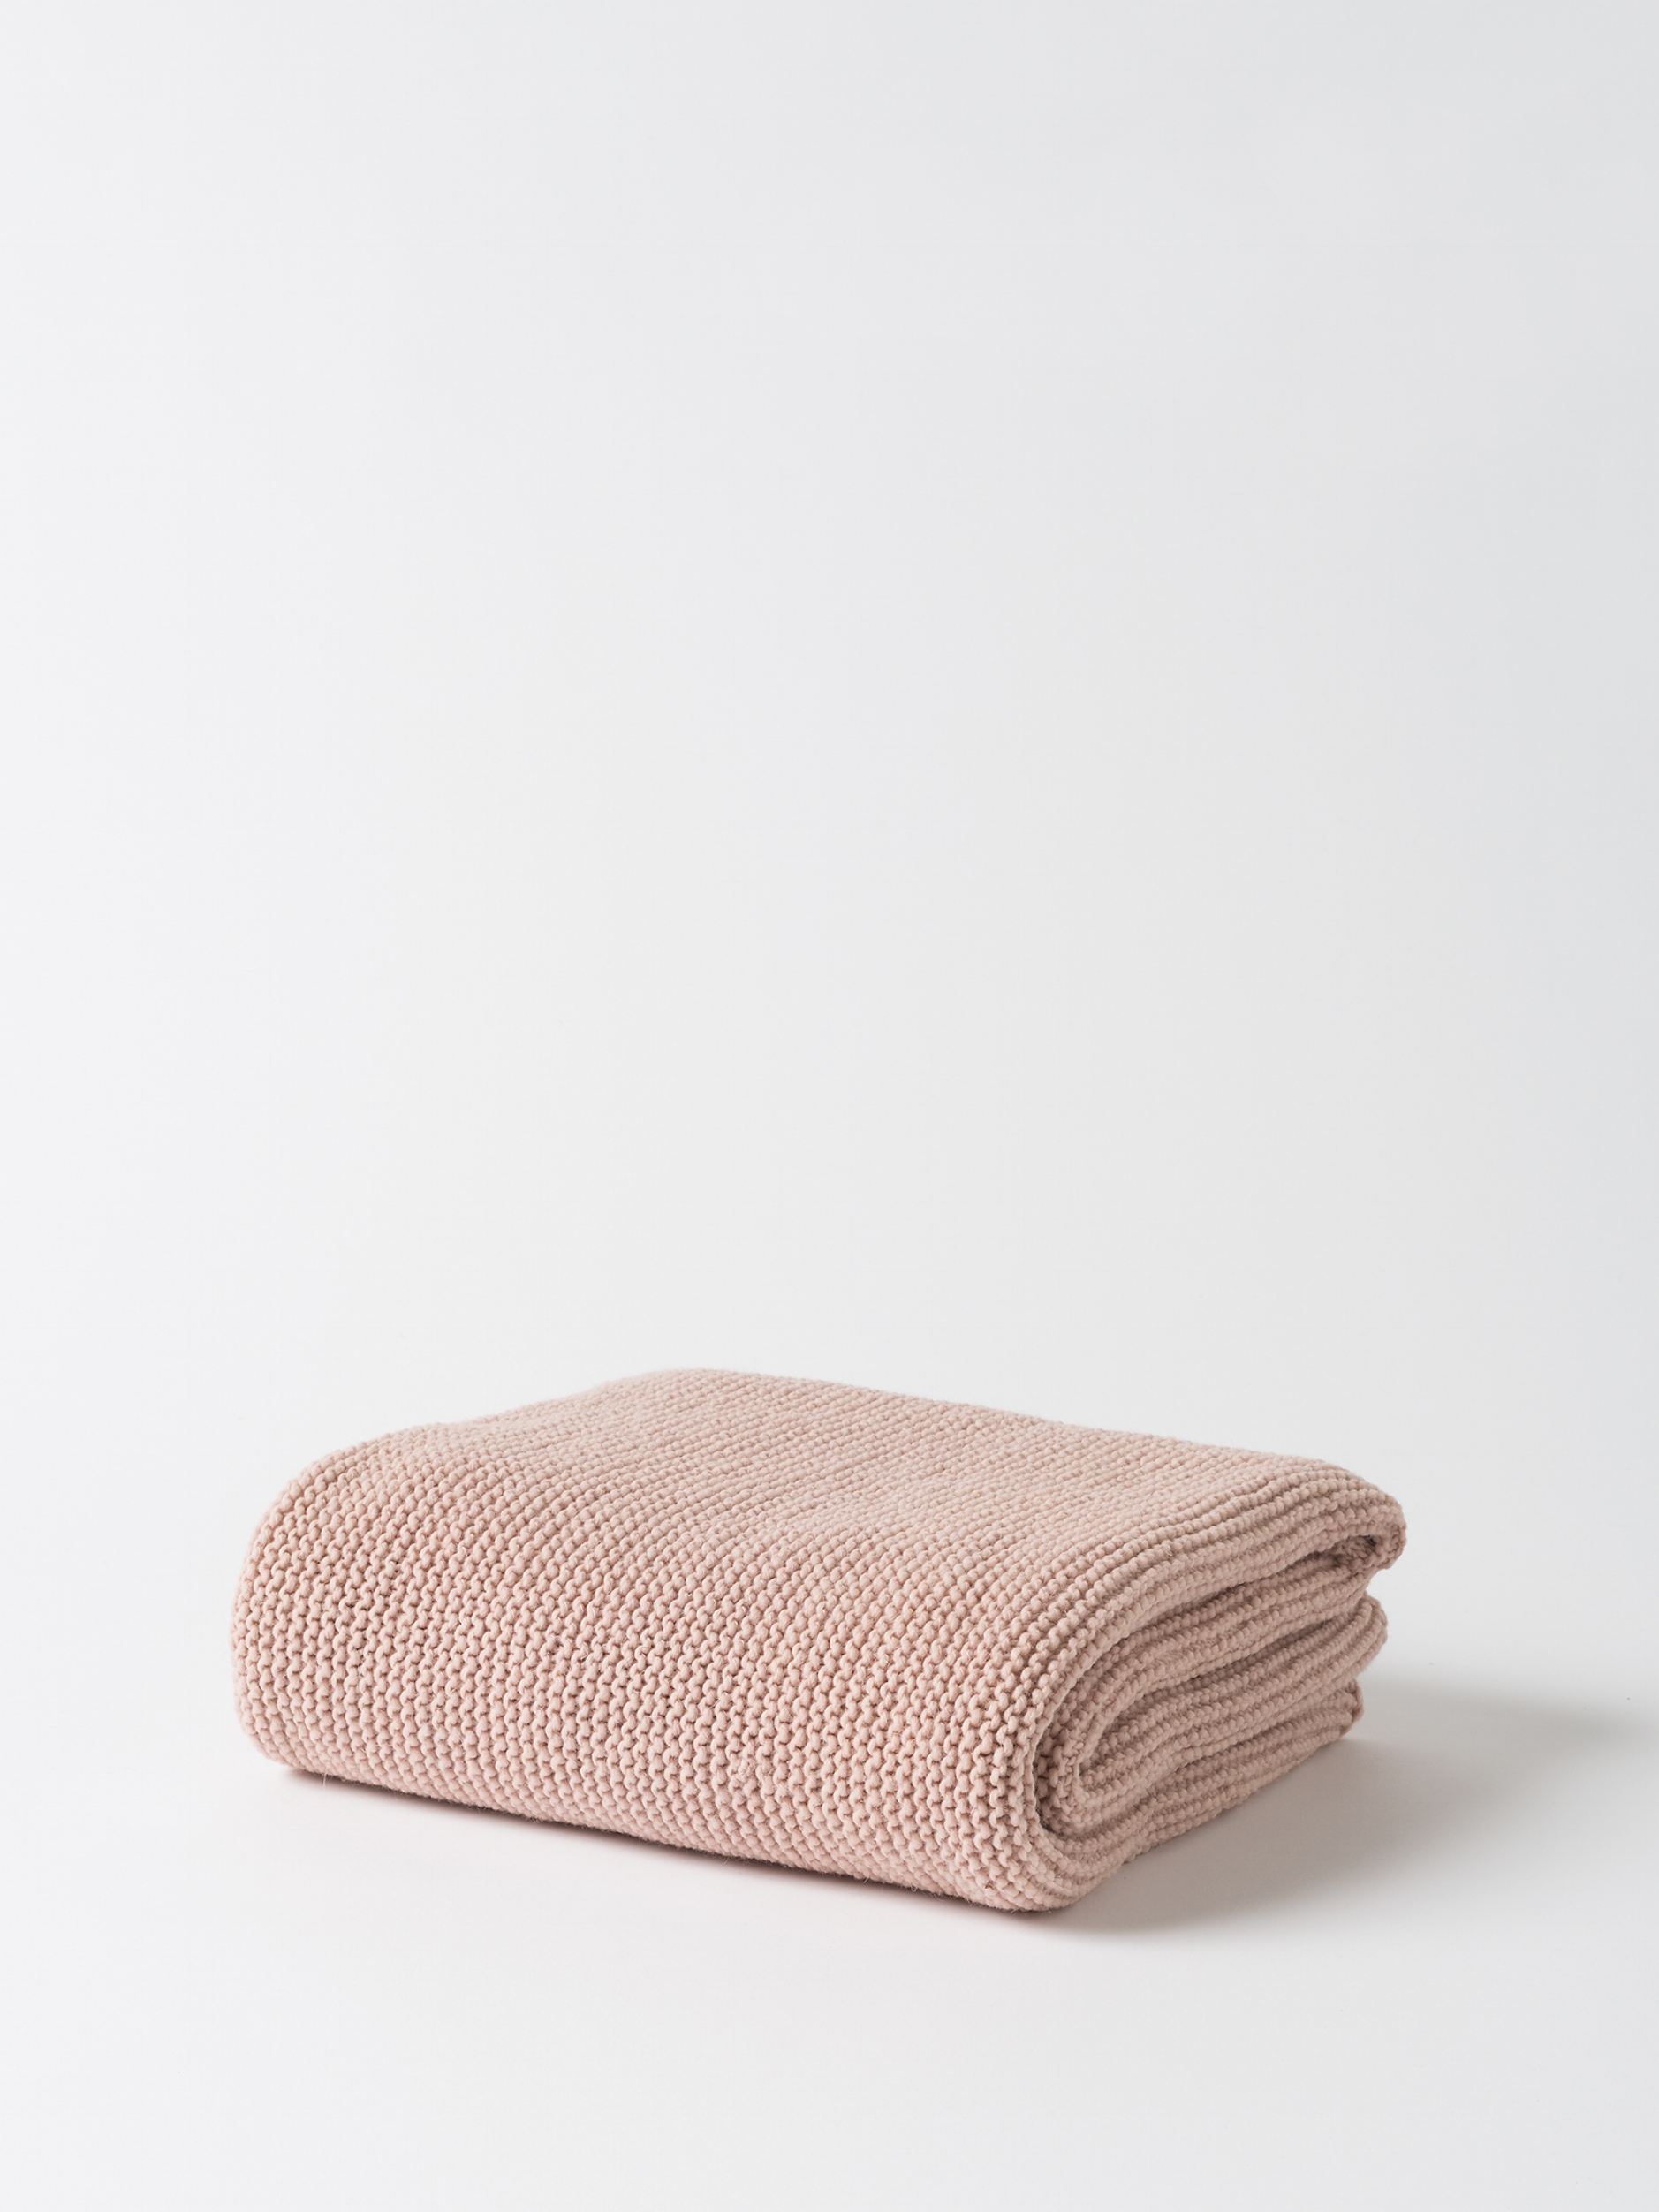 Purl Knit Wool Throw $239.00